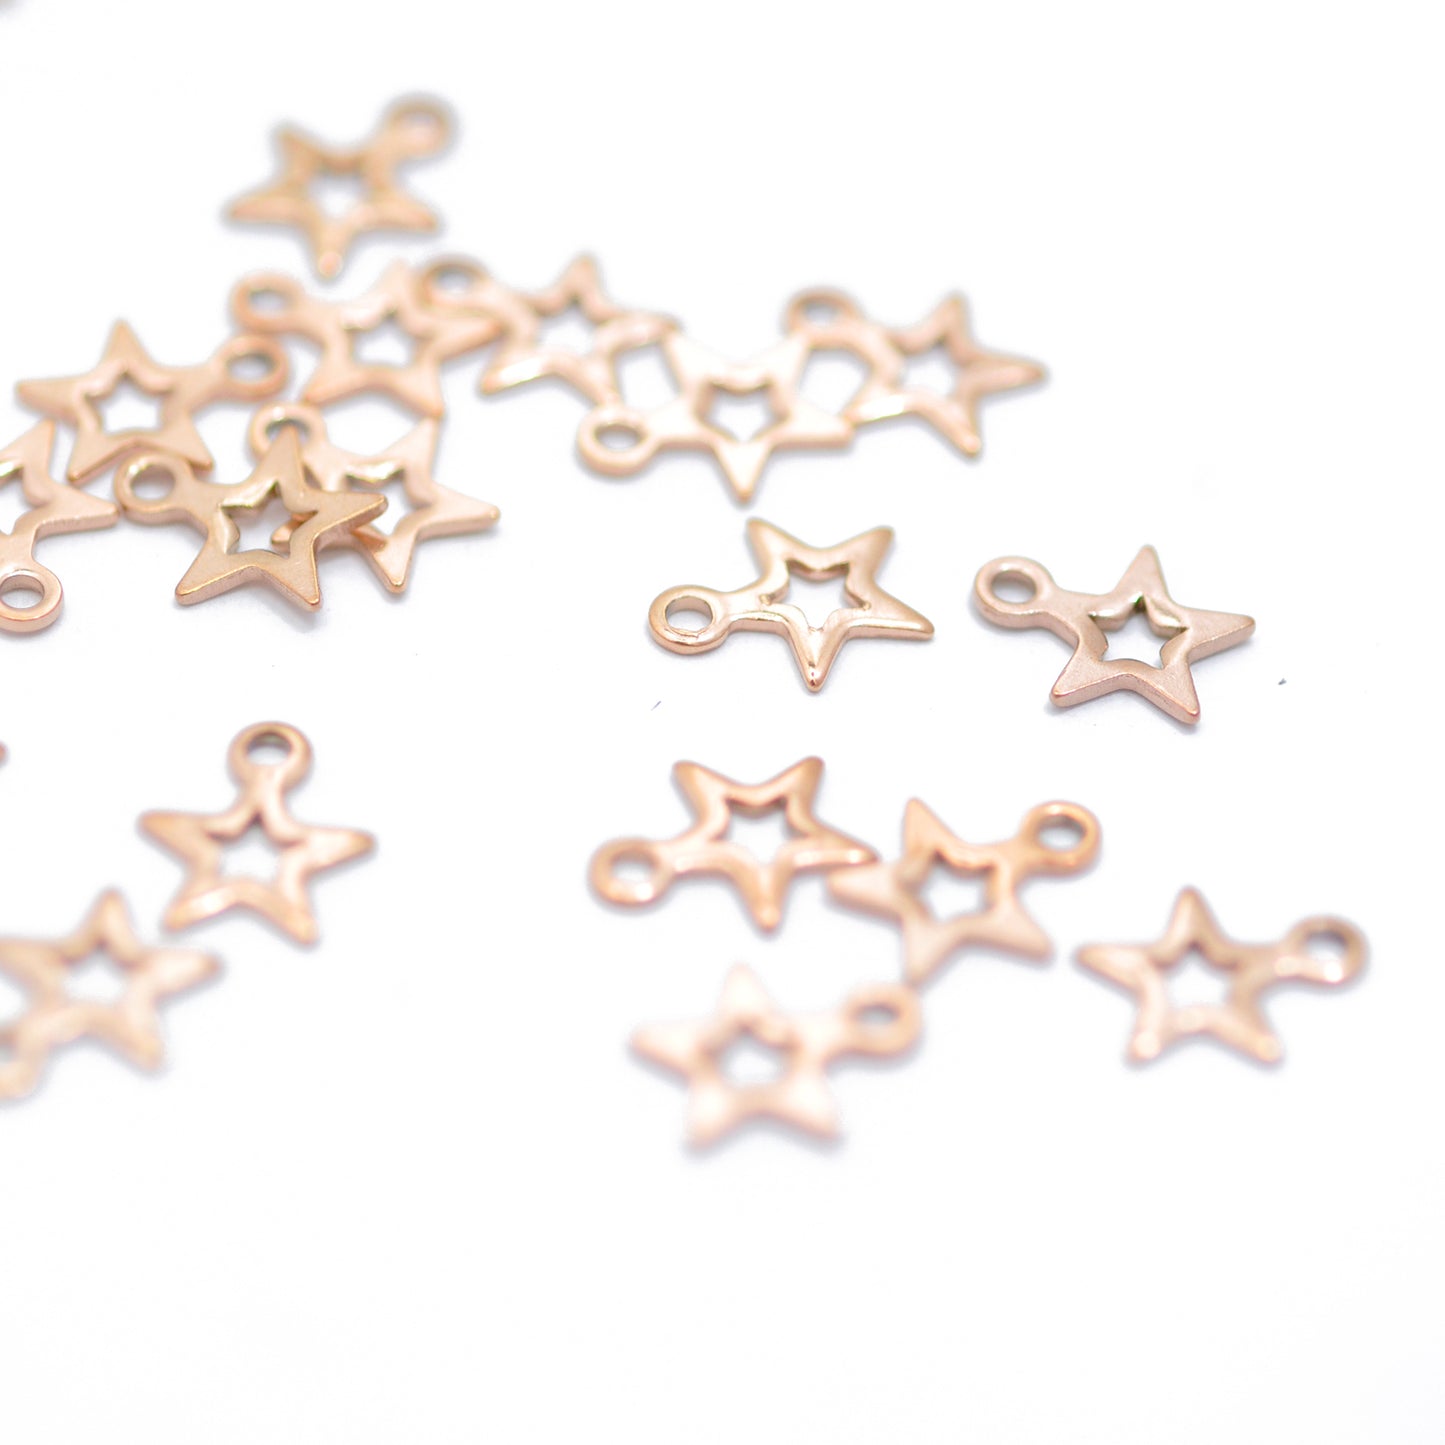 Stainless steel mini star pendant / rose gold plated / 7mm